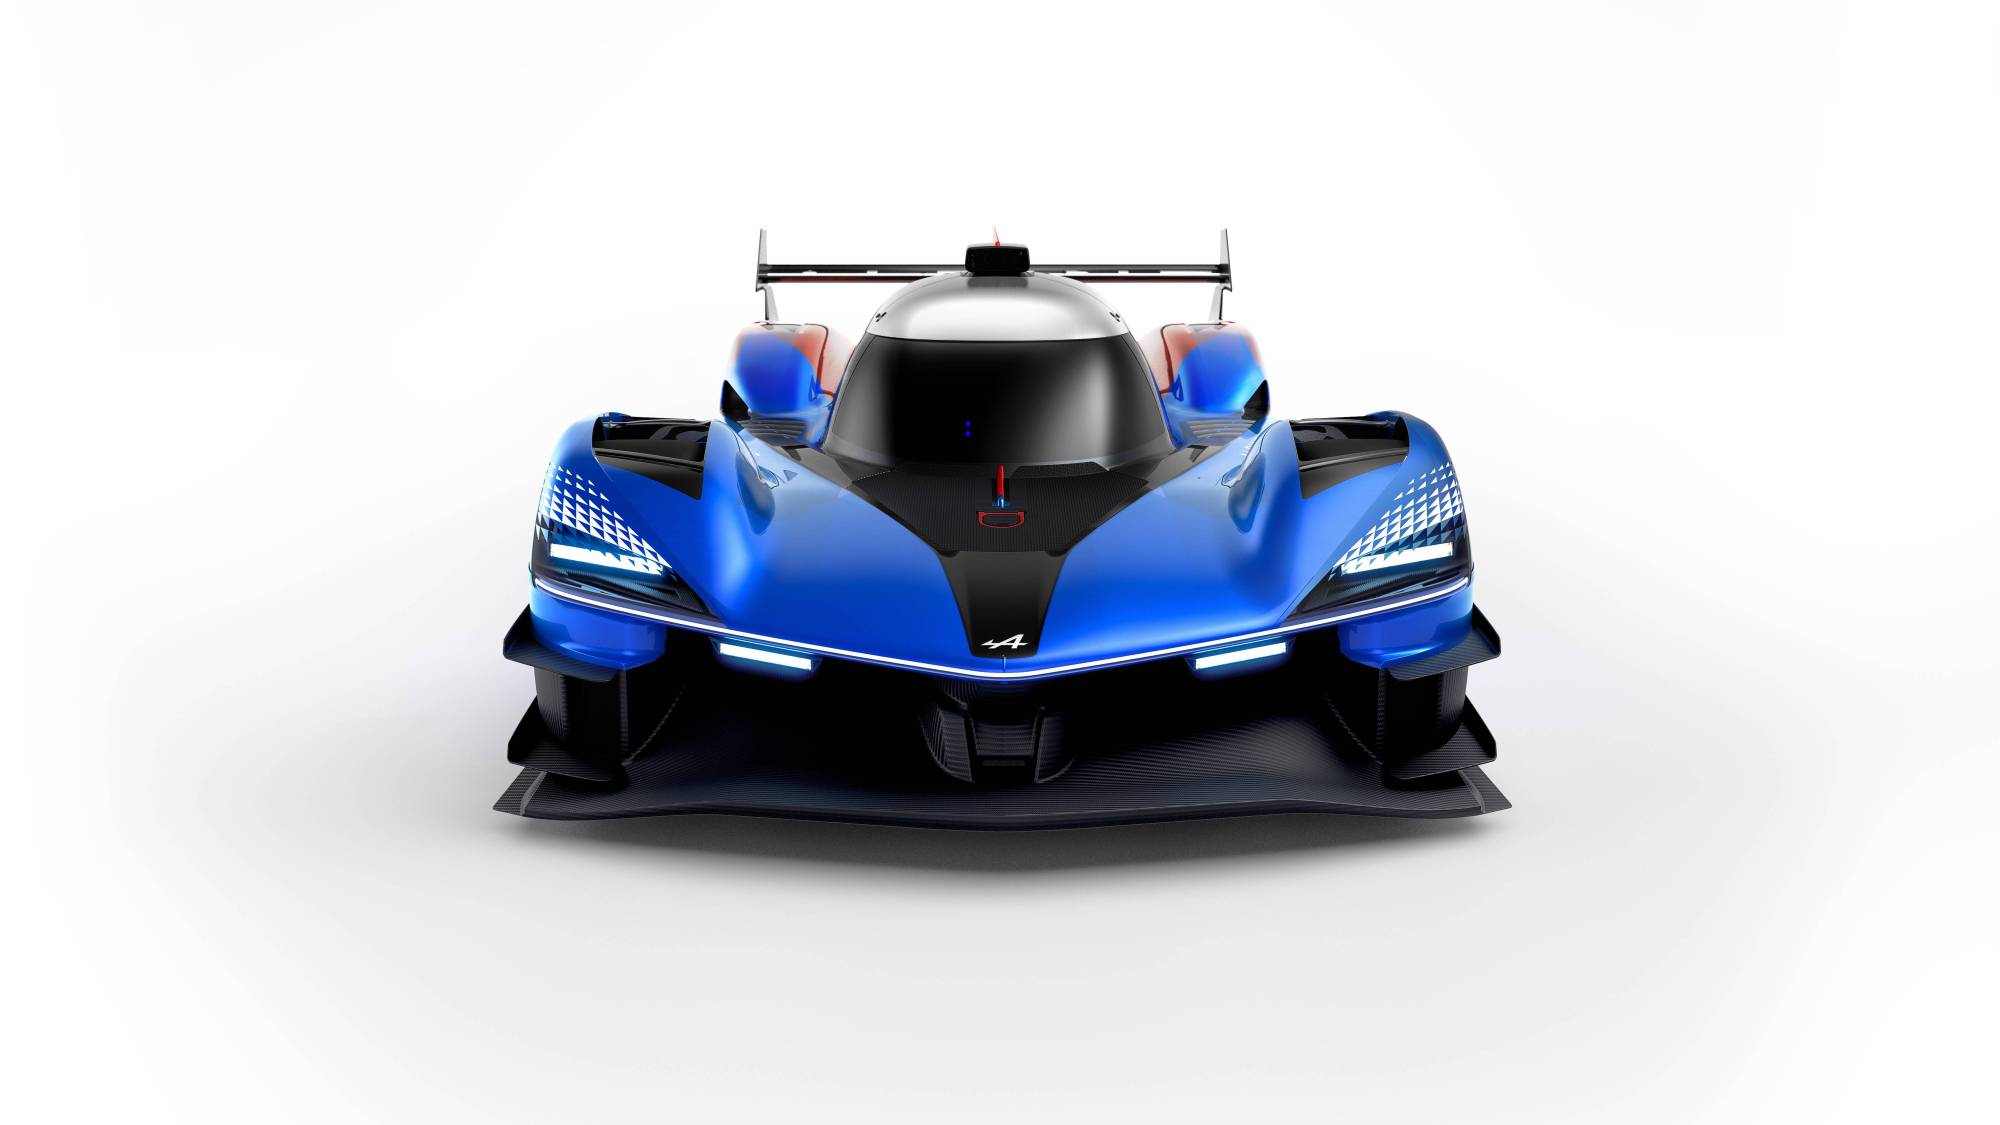 Alpine introduces the world to its Hypercar, the A424_β